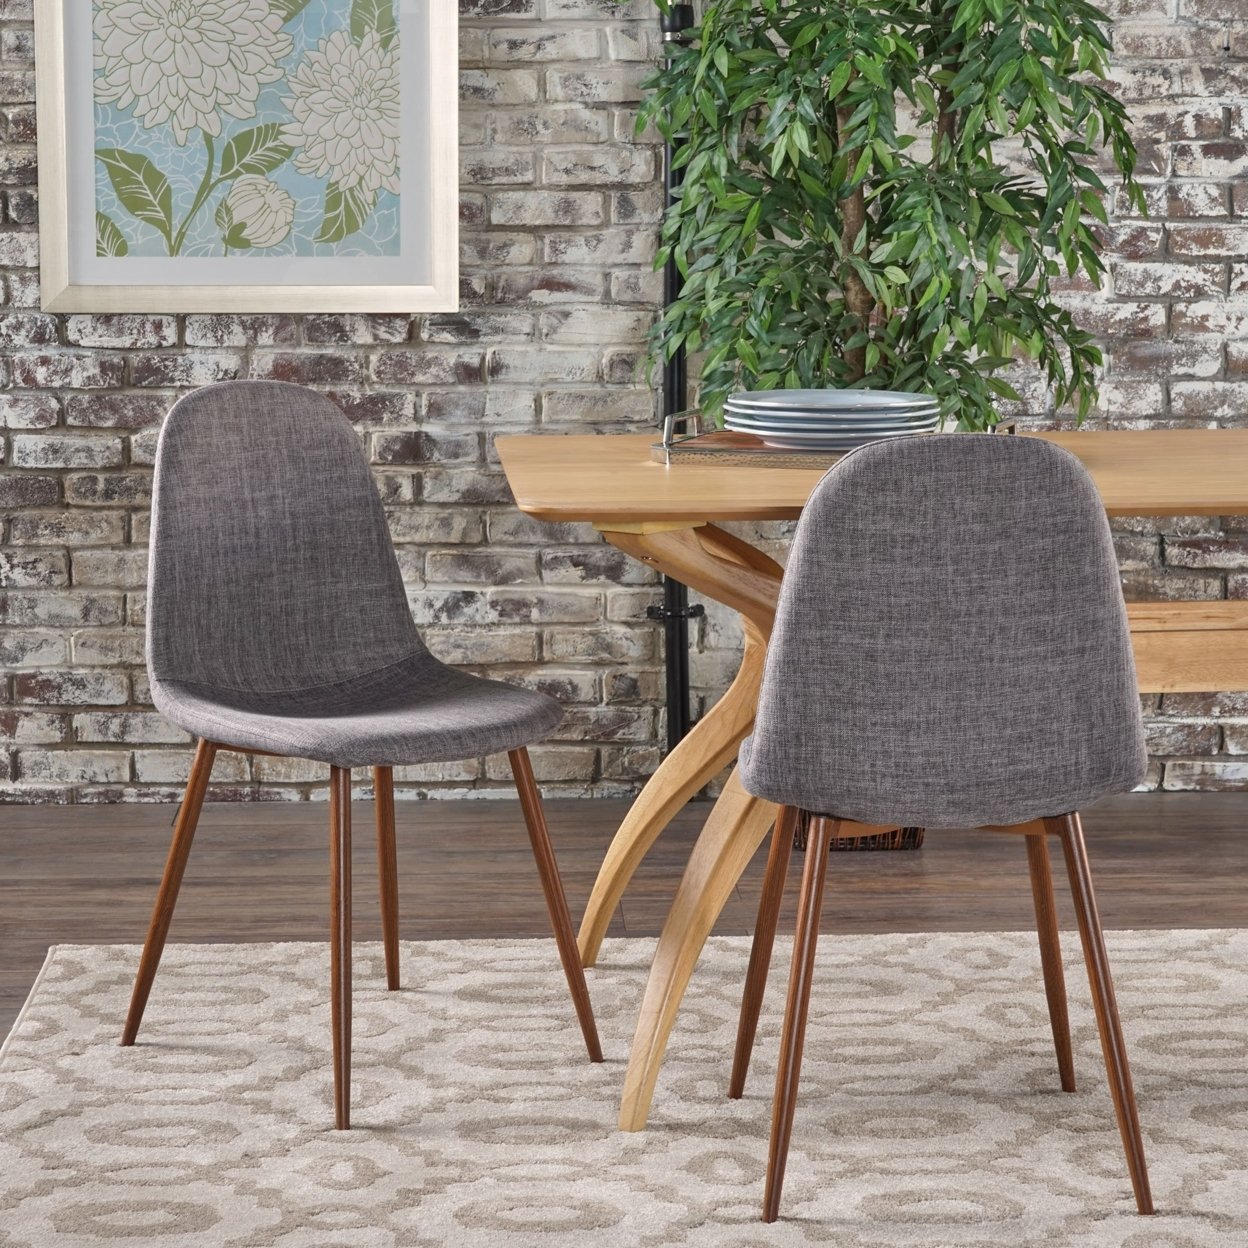 Resta Mid Century Fabric Dining Chairs With Wood Finished Metal Legs (Set Of 2) - Light Gray/Dark Brown